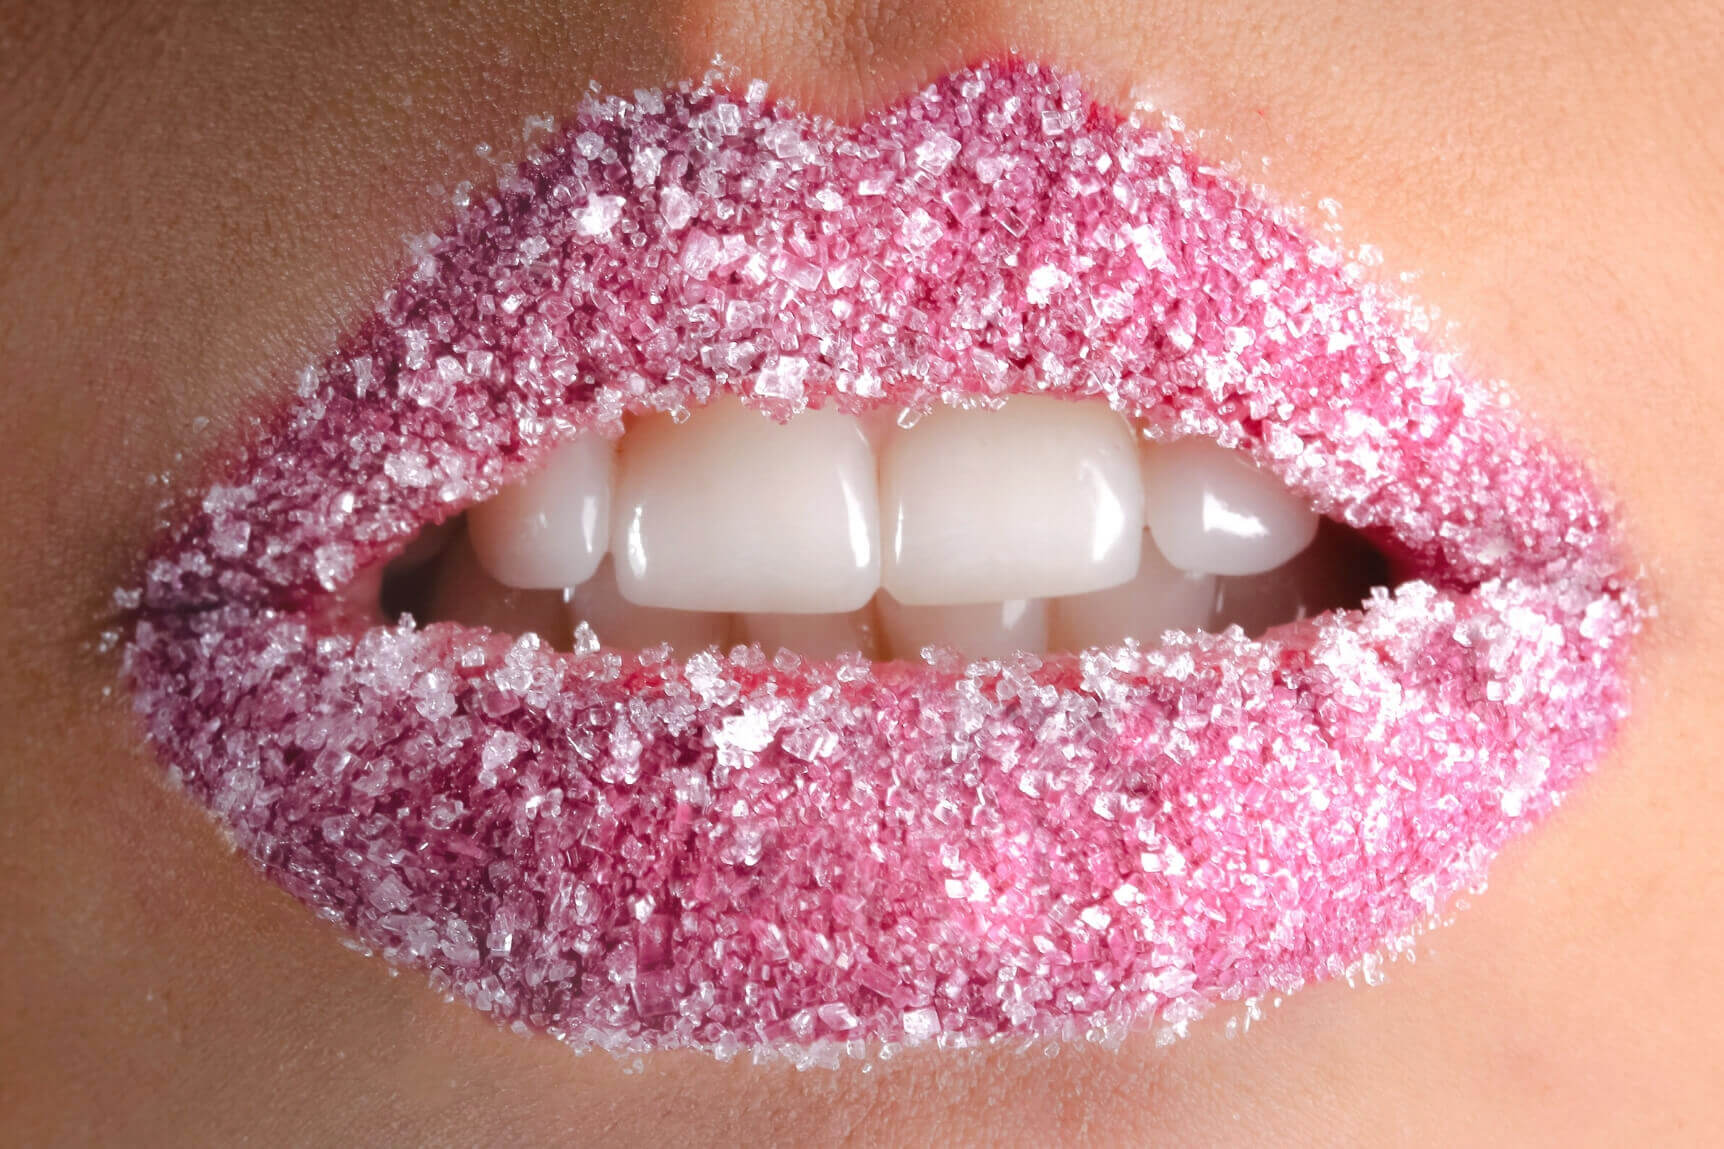 How Does Sugar Affect Your Teeth?